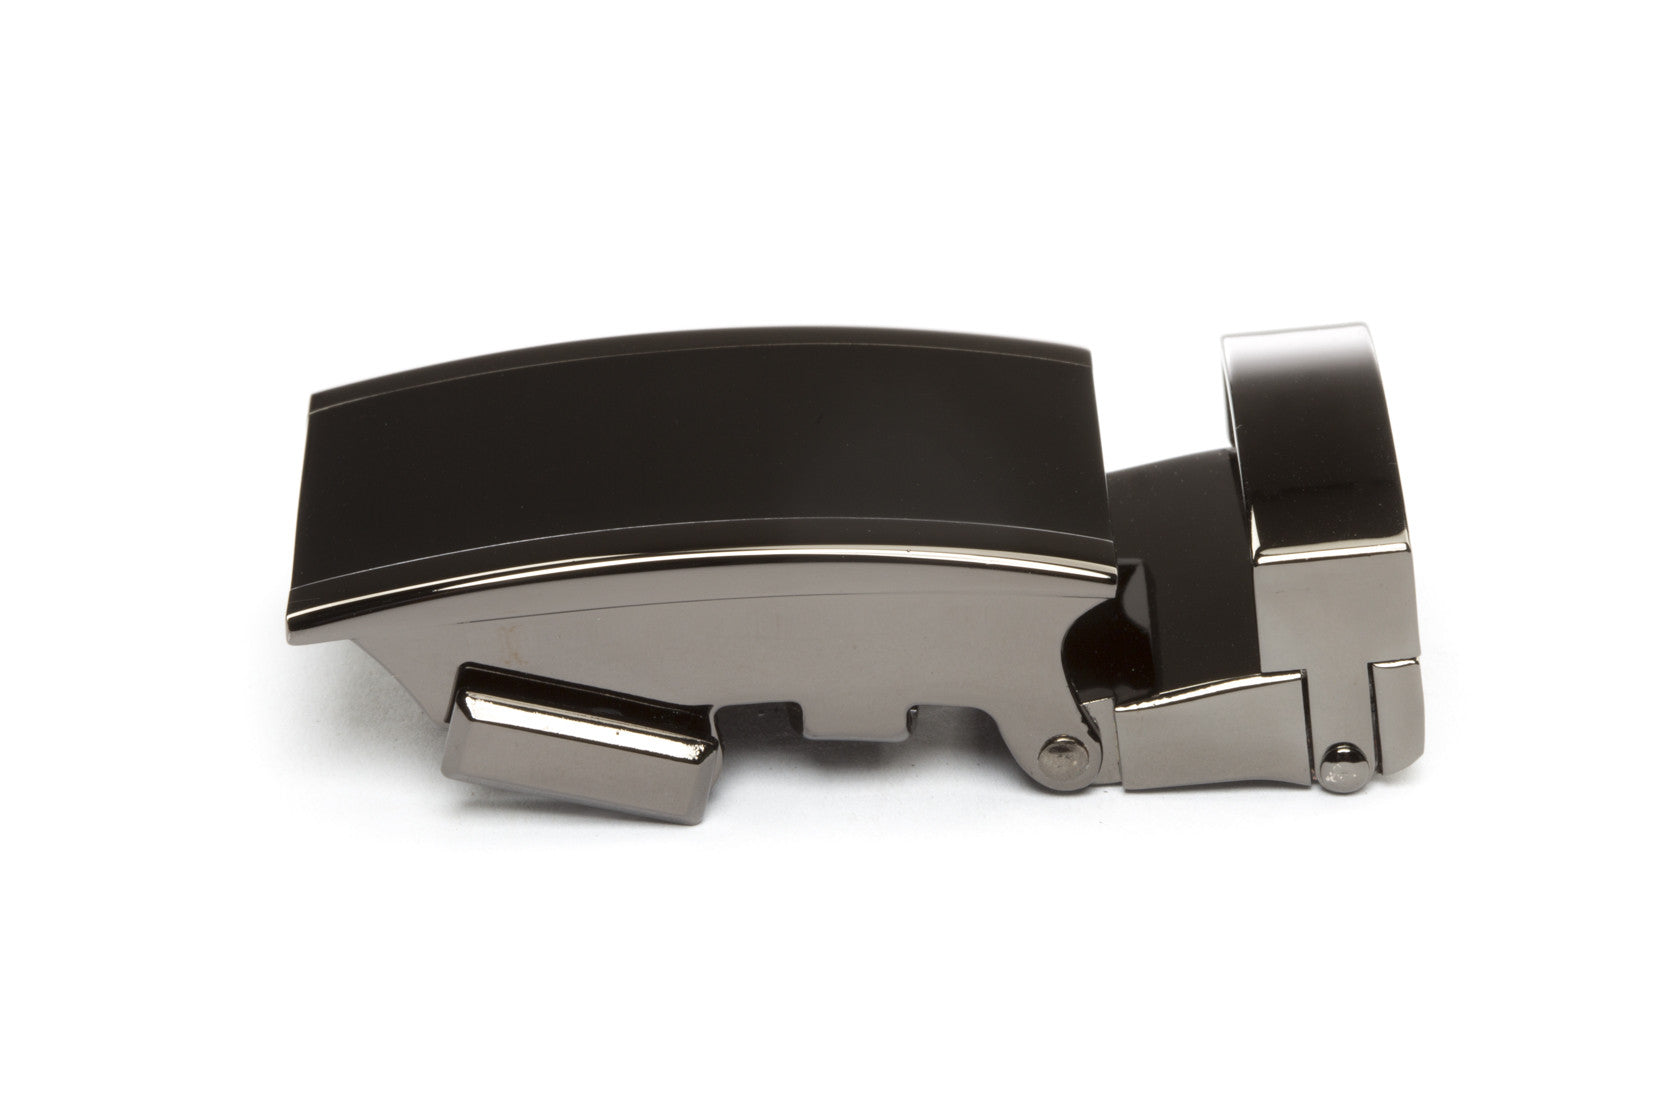 Men's onyx ratchet belt buckle in smoked gunmetal with a 1.25-inch width, left side view.